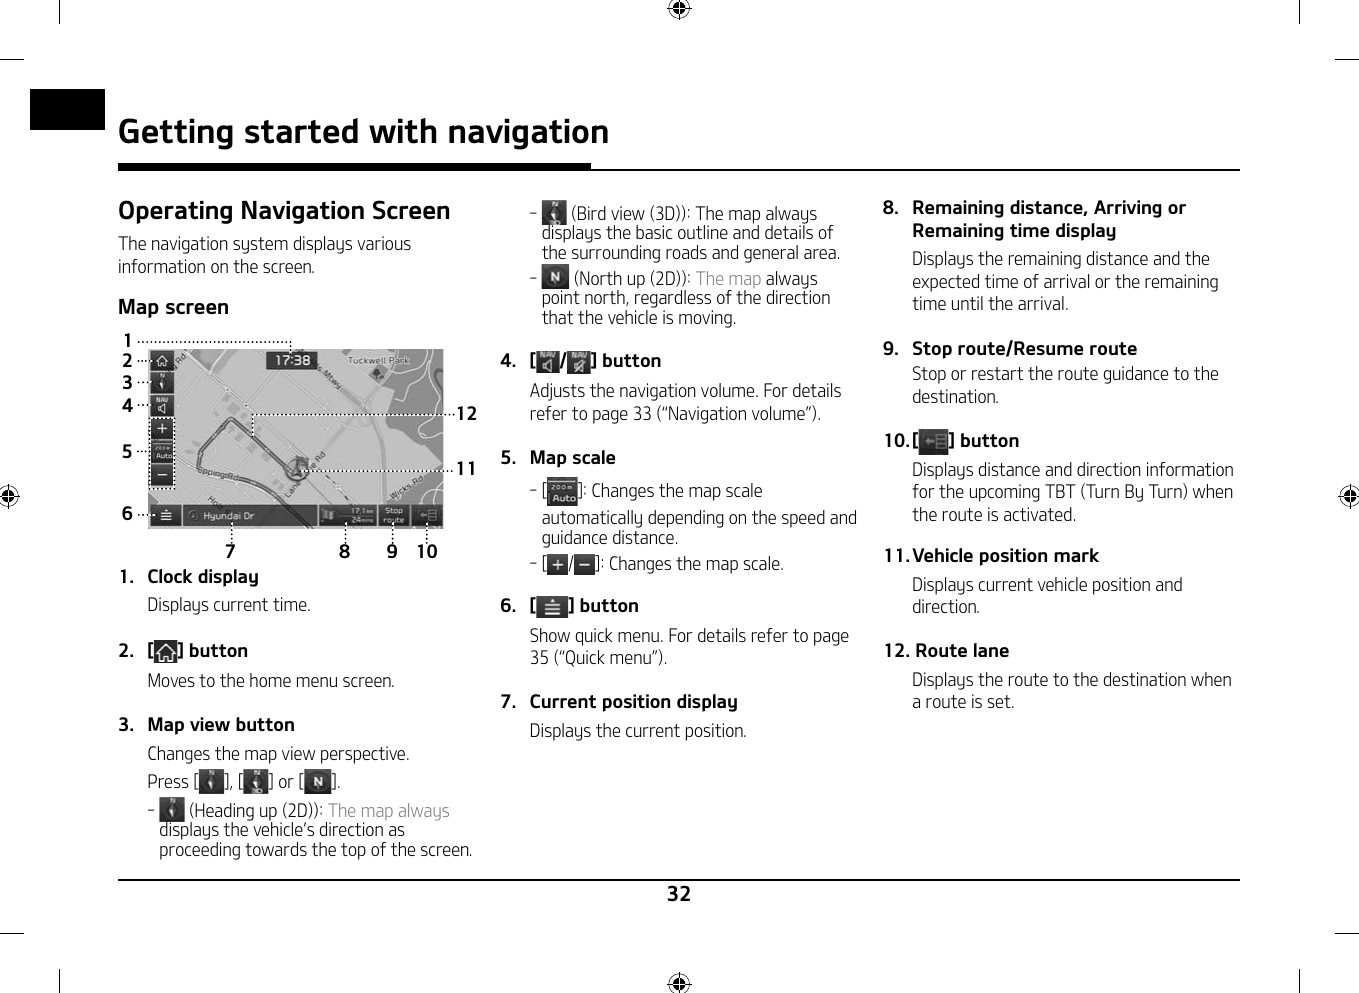 32Getting started with navigationOperating Navigation ScreenThe navigation system displays various information on the screen.Map screen1234568971012111.  Clock display  Displays current time.2.  [ ] button  Moves to the home menu screen.3.  Map view button  Changes the map view perspective.  Press [ ], [ ] or [ ].  ‐  (Heading up (2D)): The map always displays the vehicle䳓s direction as proceeding towards the top of the screen. ‐   (Bird view (3D)): The map always displays the basic outline and details of the surrounding roads and general area. ‐  (North up (2D)): The map always point north, regardless of the direction that the vehicle is moving.4.  [ / ] button  Adjusts the navigation volume. For details refer to page 33 (䳖Navigation volume䳗).5.  Map scale ‐ [ ]: Changes the map scale automatically depending on the speed and guidance distance. ‐[ / ]: Changes the map scale.6.  [ ] button  Show quick menu. For details refer to page 35 (䳖Quick menu䳗).7.  Current position display  Displays the current position.8.  Remaining distance, Arriving or Remaining time display  Displays the remaining distance and the expected time of arrival or the remaining time until the arrival.9.  Stop route/Resume route  Stop or restart the route guidance to the destination.10. [ ] button  Displays distance and direction information for the upcoming TBT (Turn By Turn) when the route is activated.11. Vehicle position mark  Displays current vehicle position and direction.12. Route lane  Displays the route to the destination when a route is set.